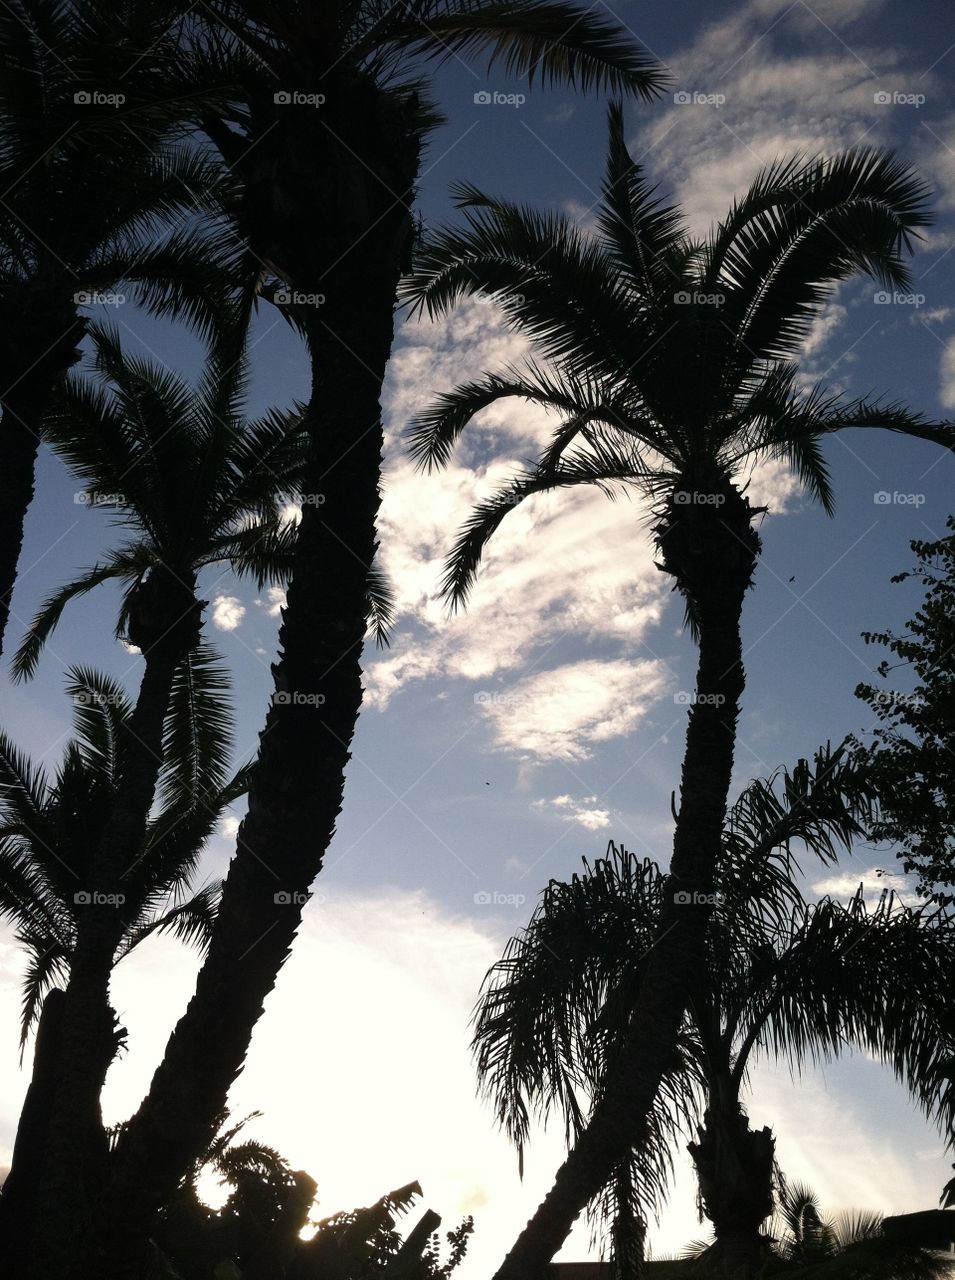 Palm trees and sky. Looking up through the palms at clouds in sky